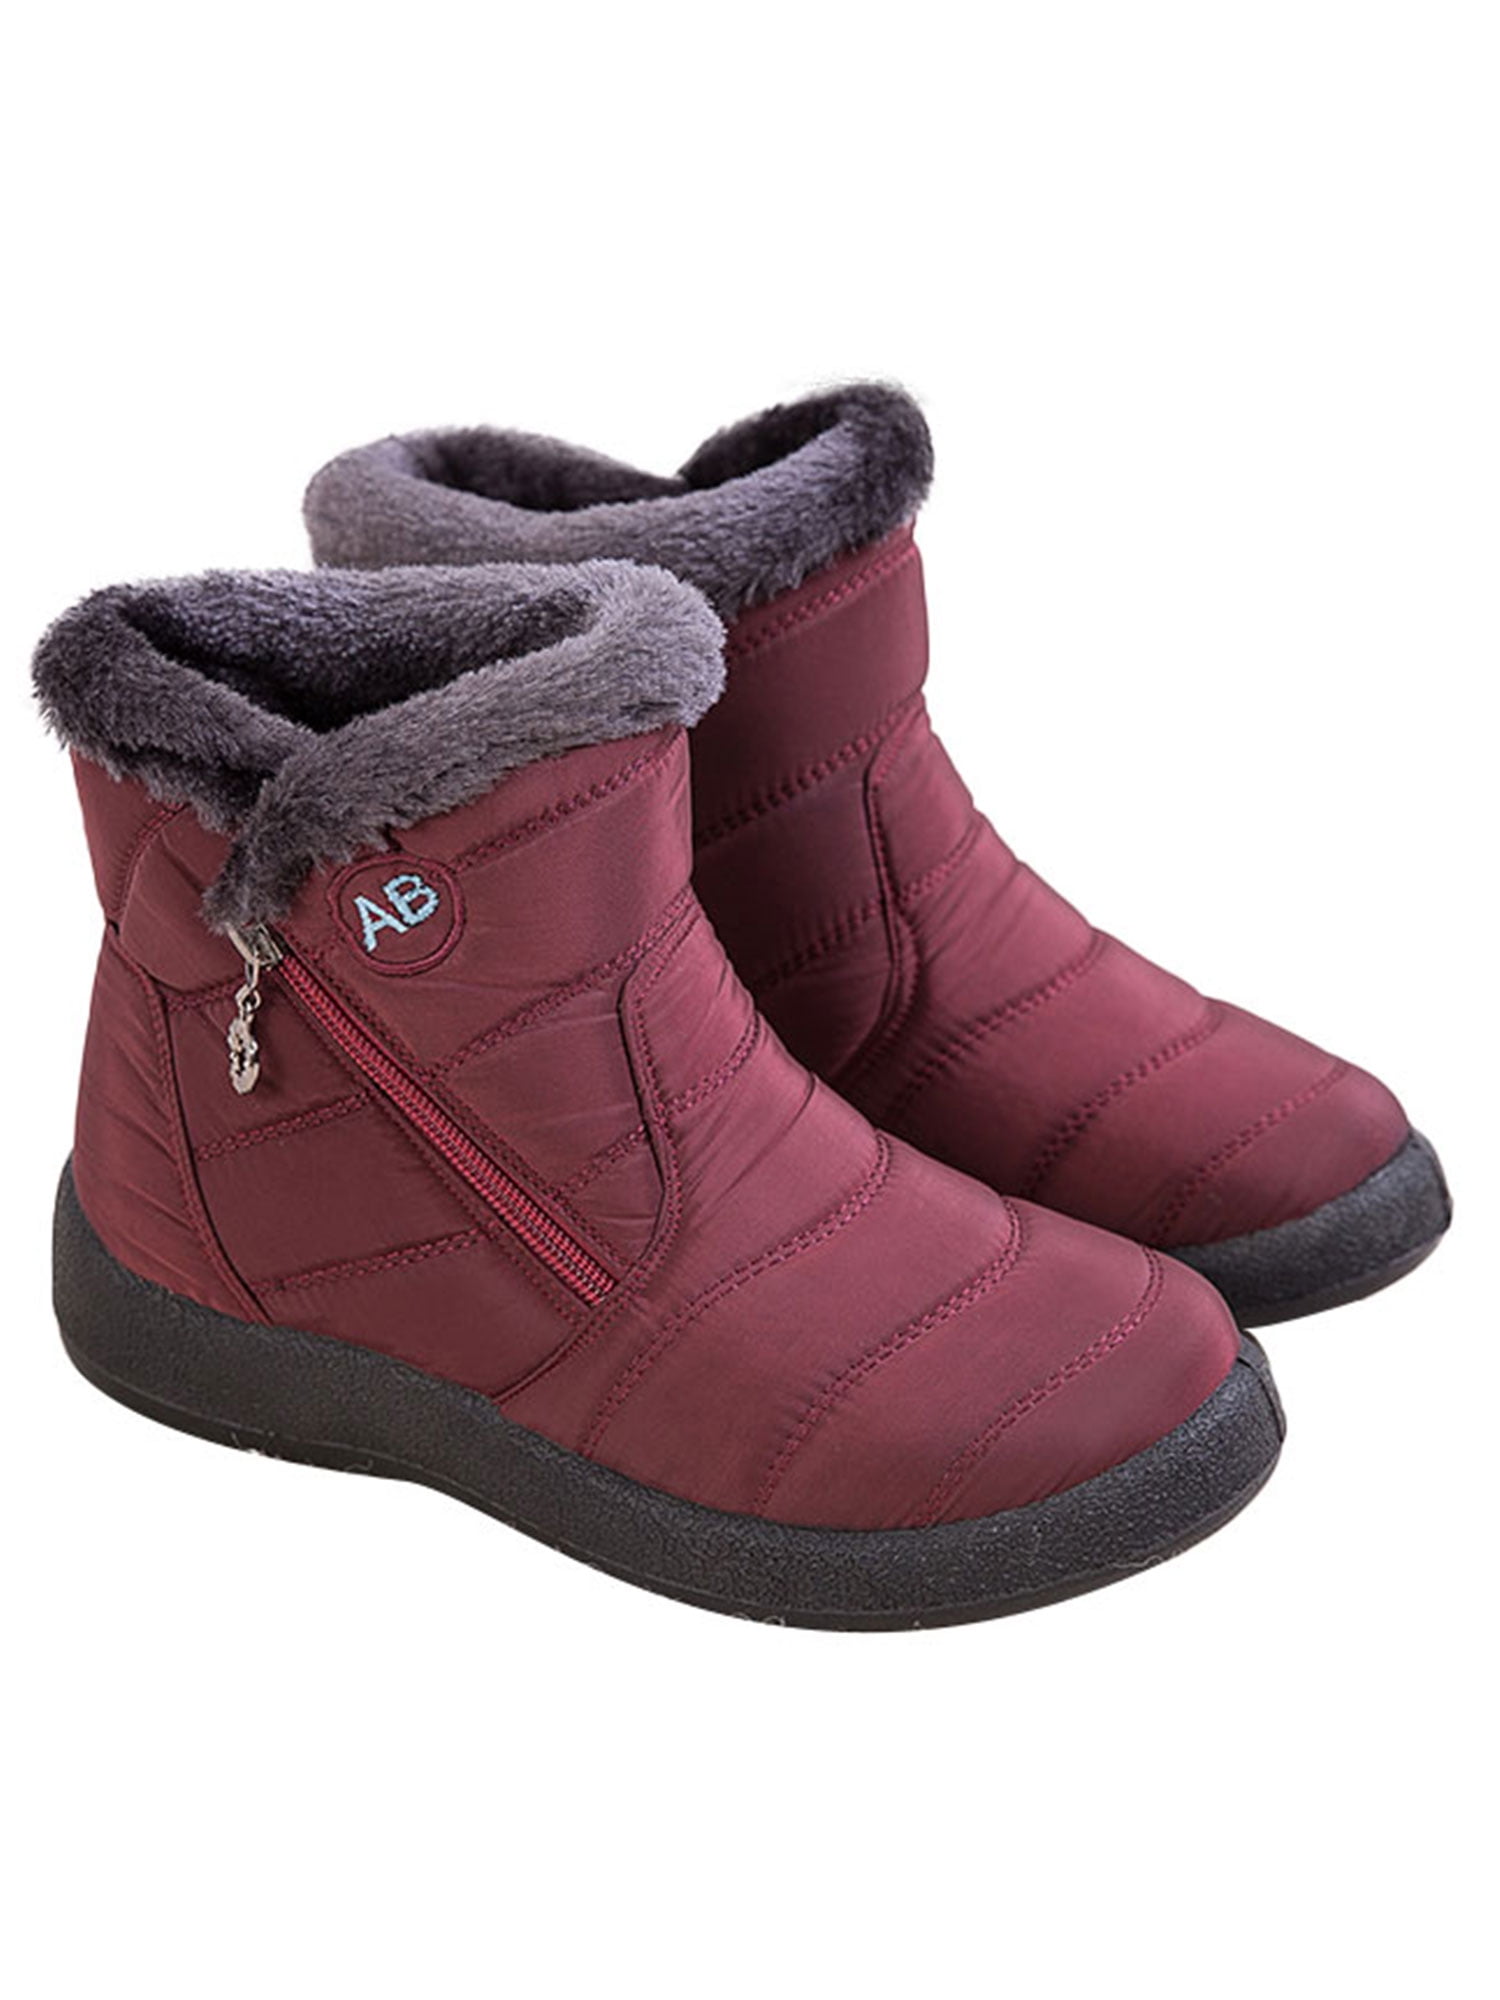 Womens Ladies Waterproof Winter Ankle Boots Leather Fur-lined Slip On Warm Shoes 